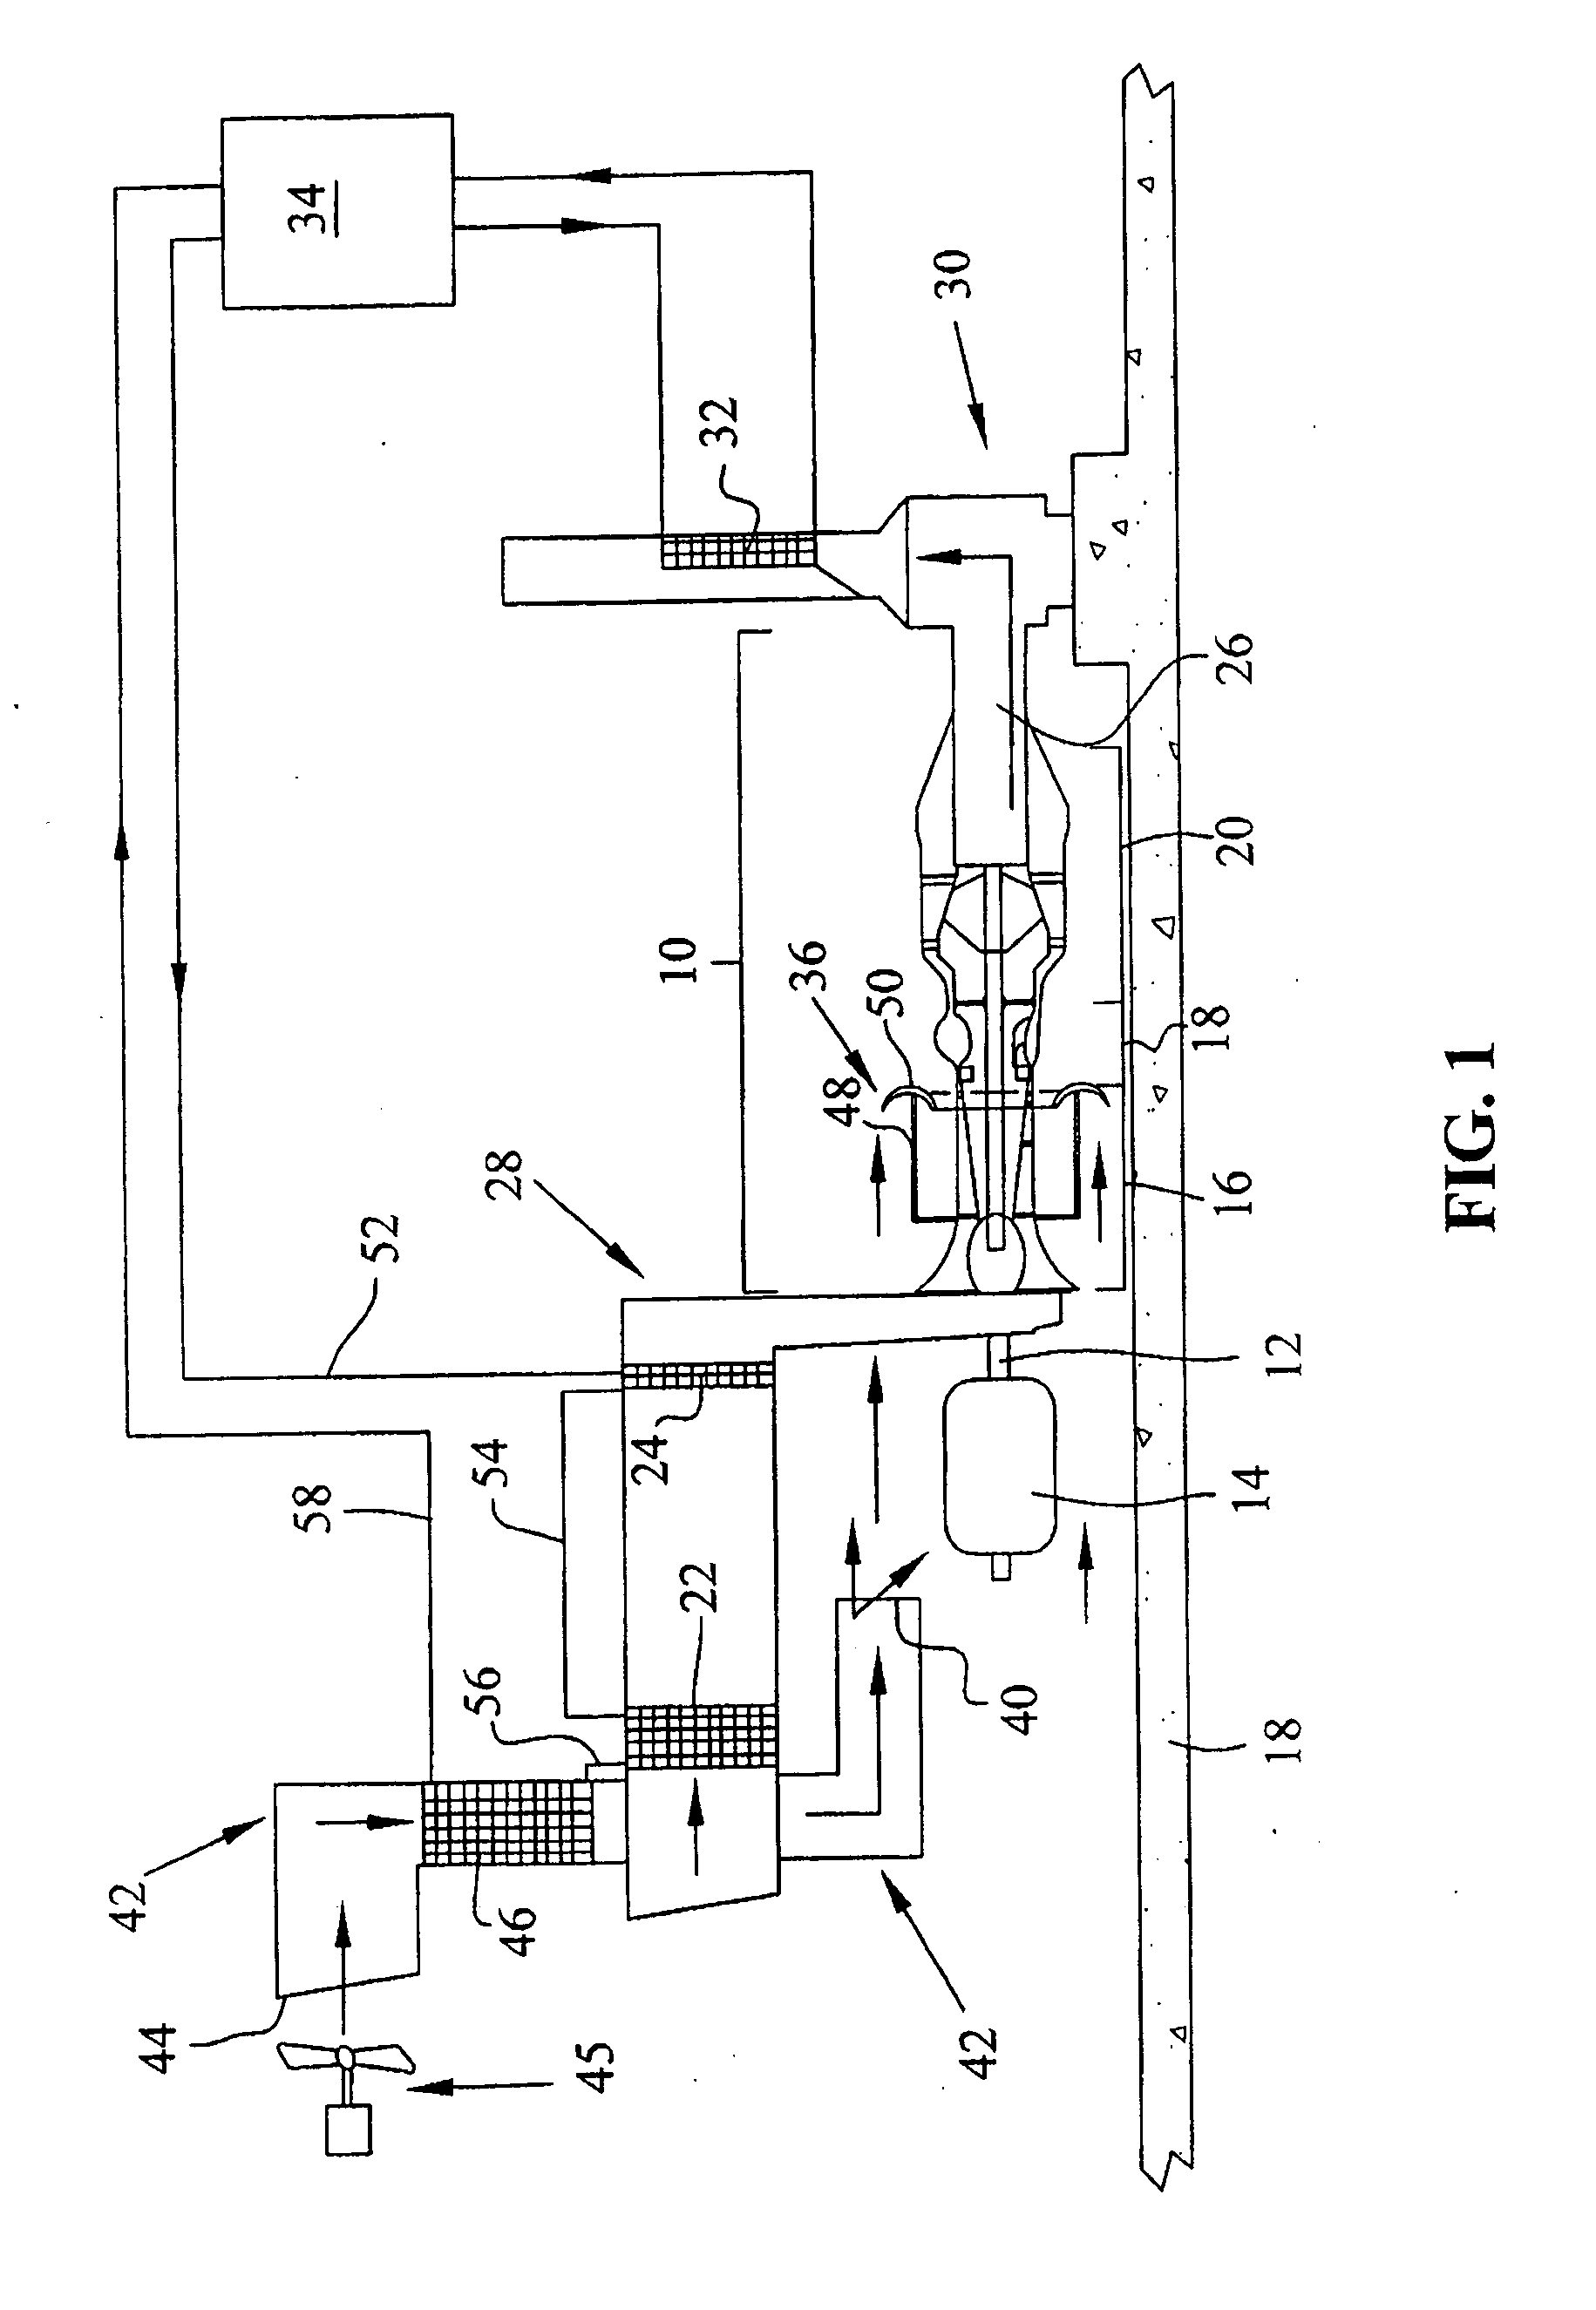 Heat absorbing and reflecting shield for air breathing heat engine